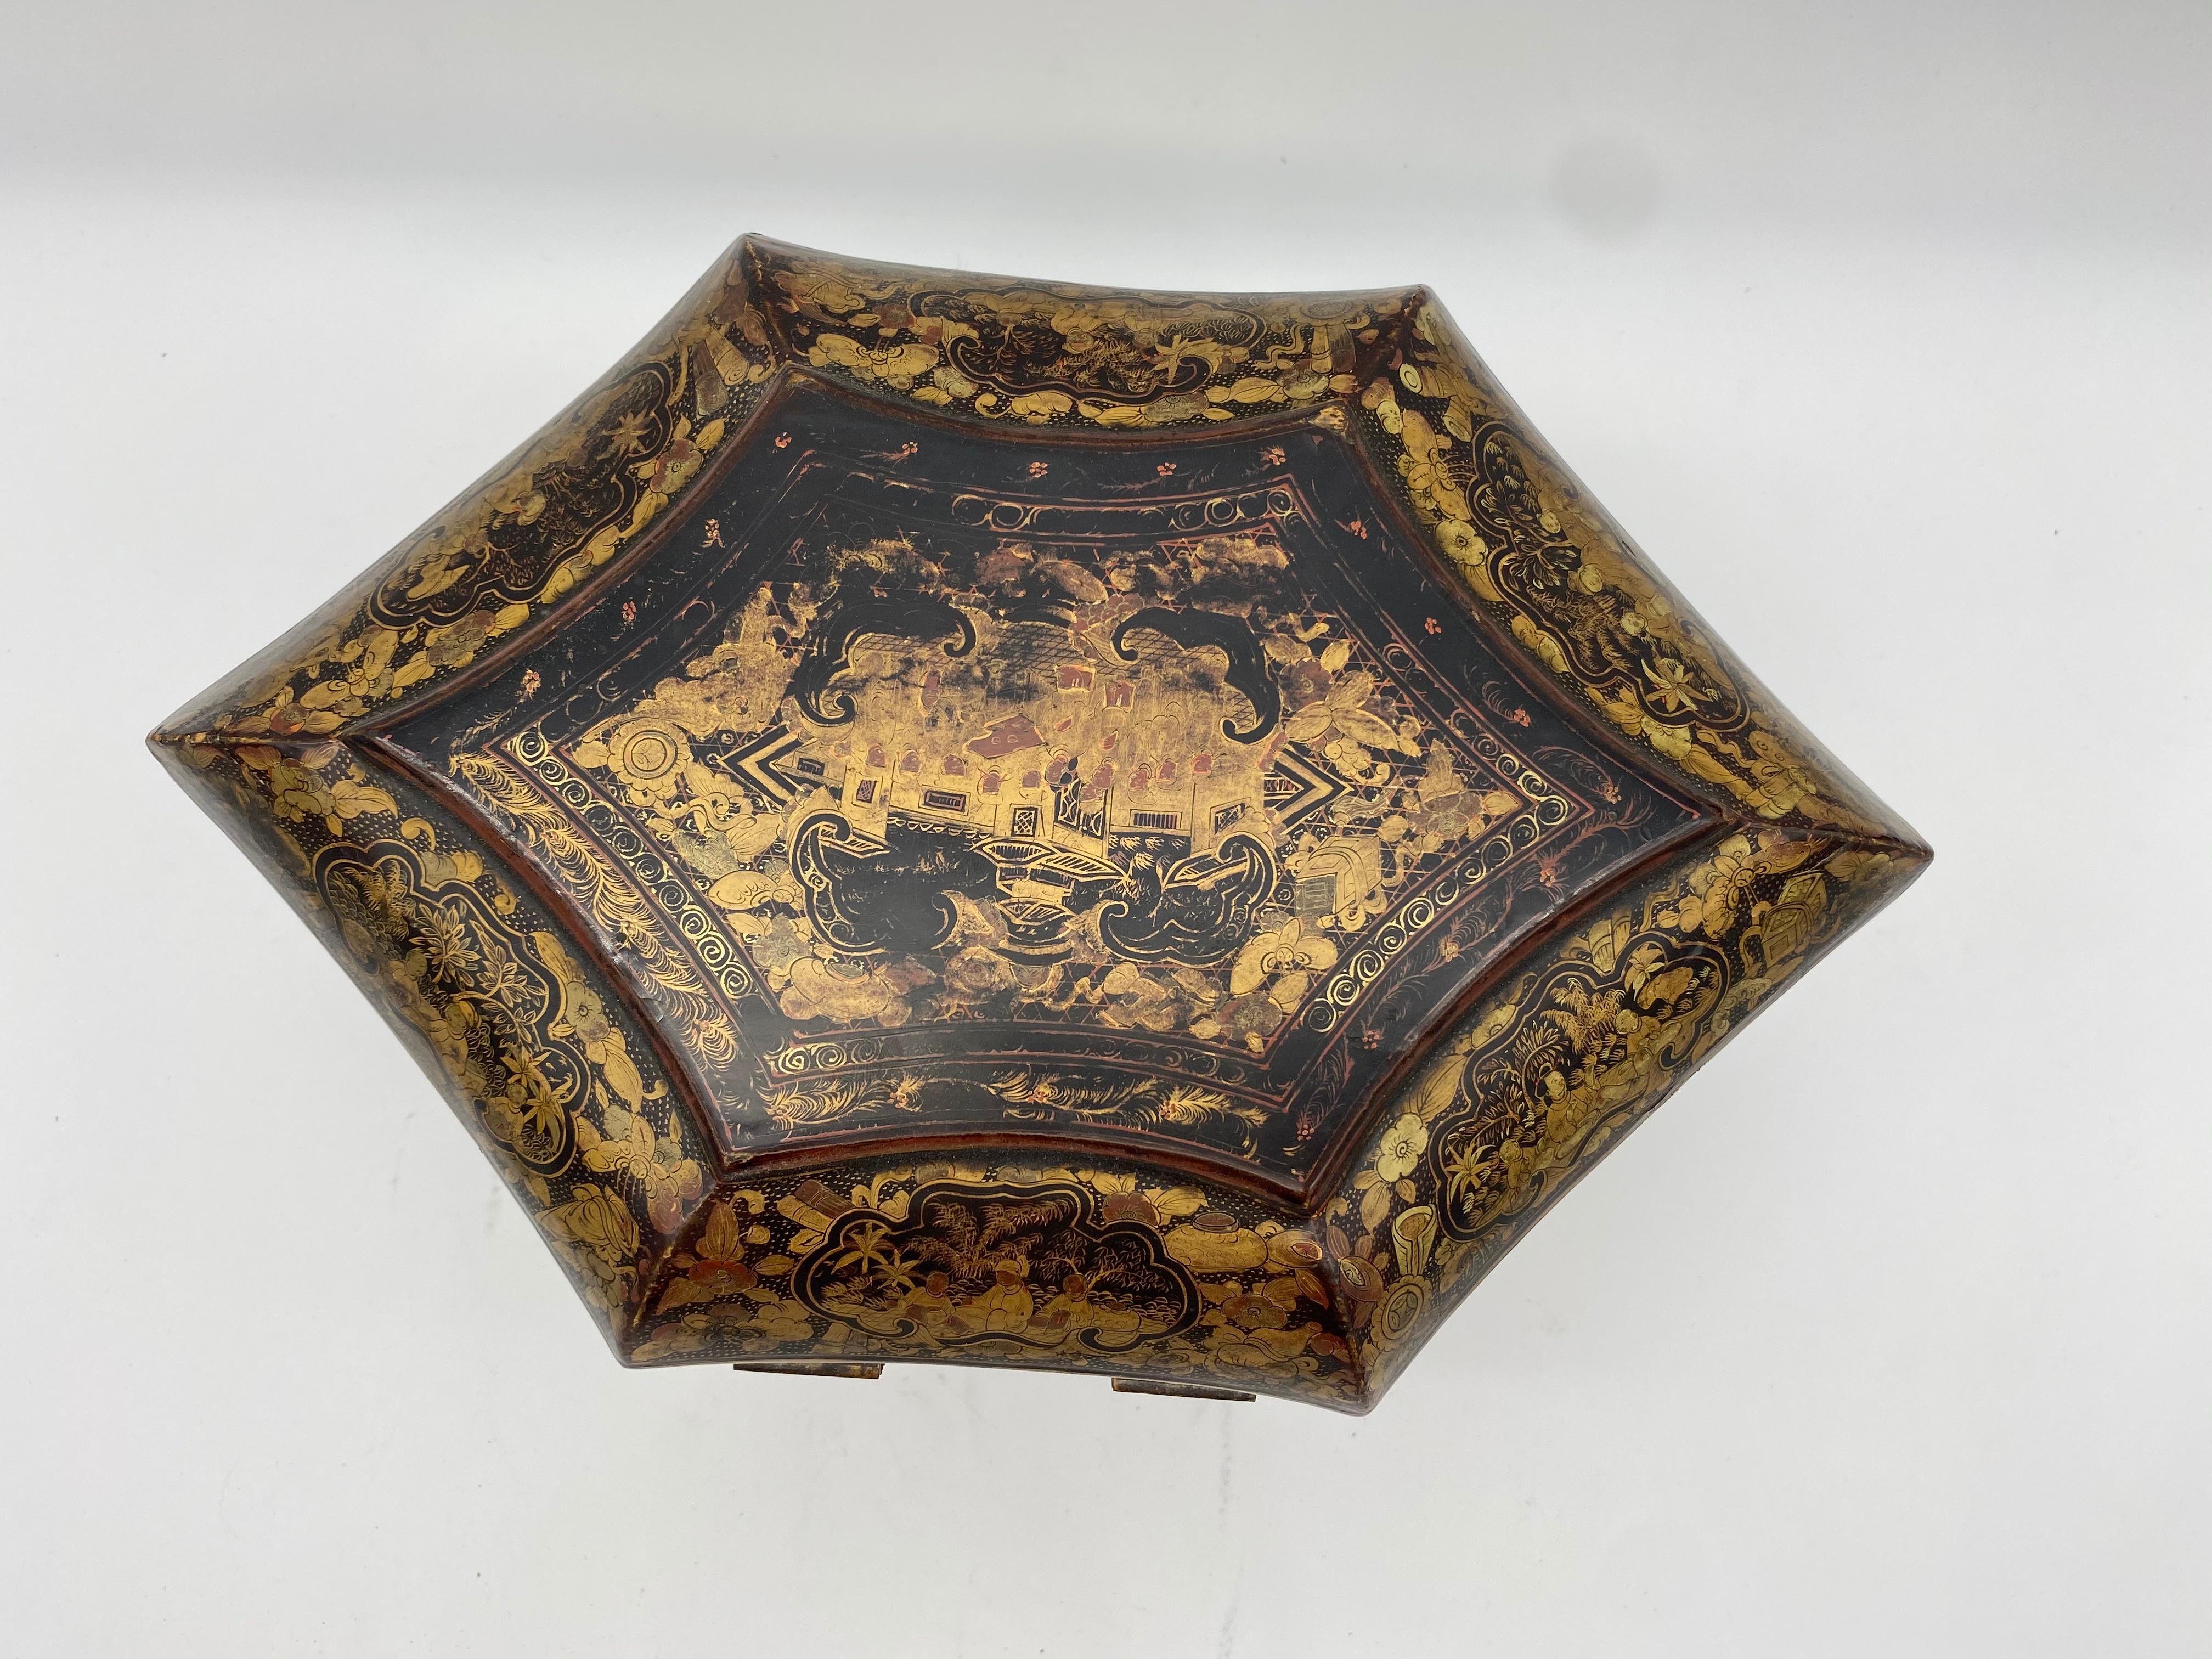 19th century Chinese gold lacquer tea caddy container from the Qing Dynasty. Unique shape, hard to find.